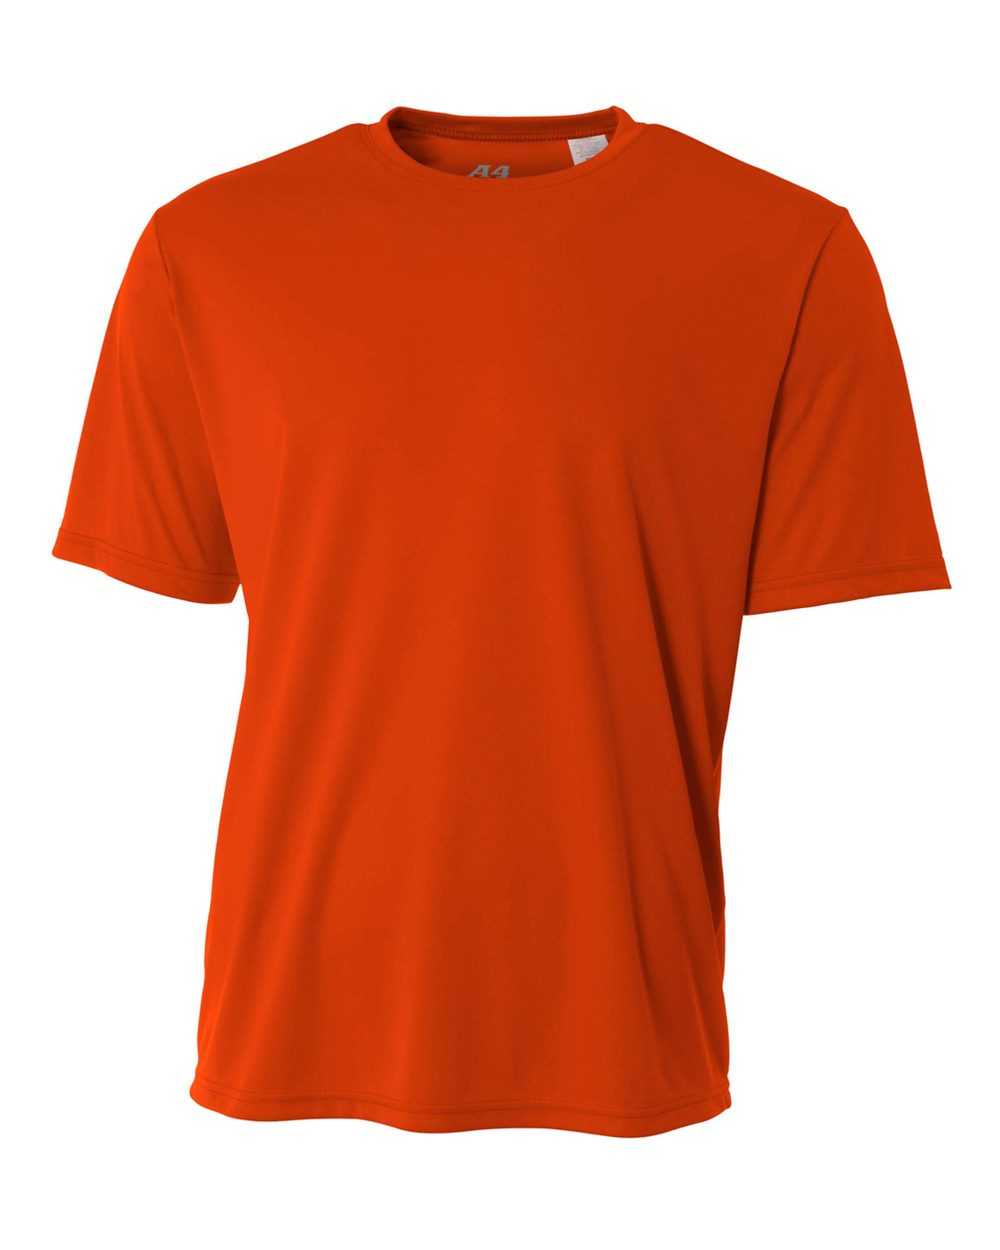 A4 N3142 Cooling Performance Crew - Athletic Orange - HIT a Double